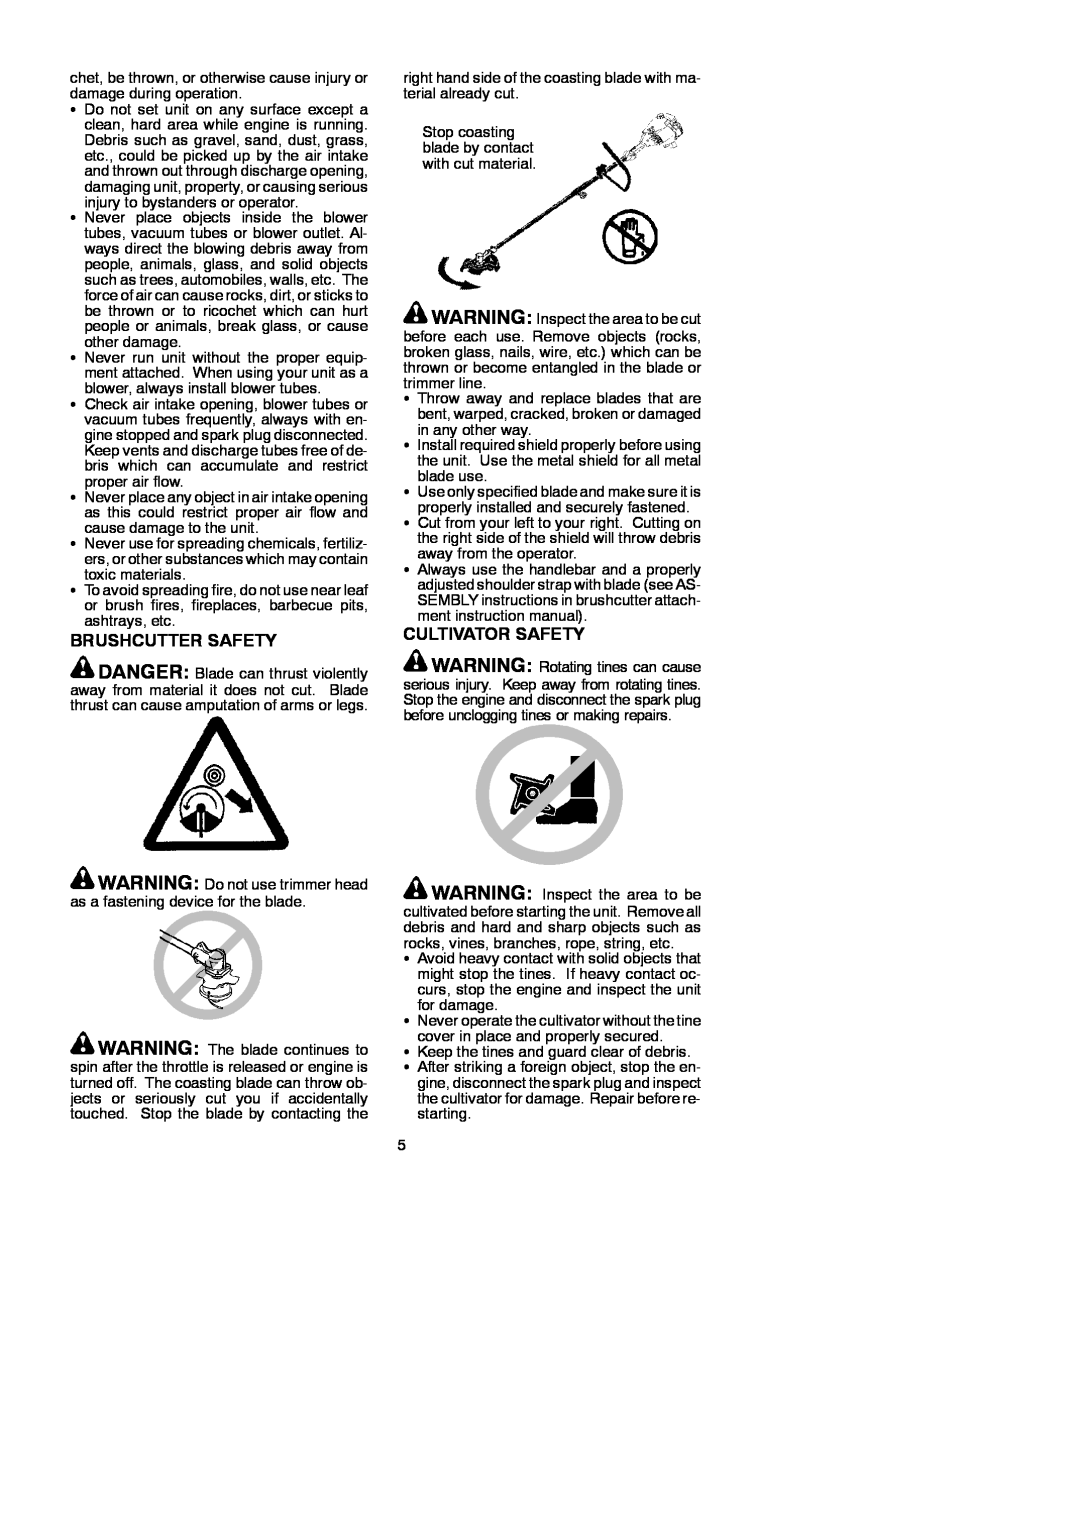 McCulloch 281 instruction manual Brushcutter Safety, Cultivator Safety 